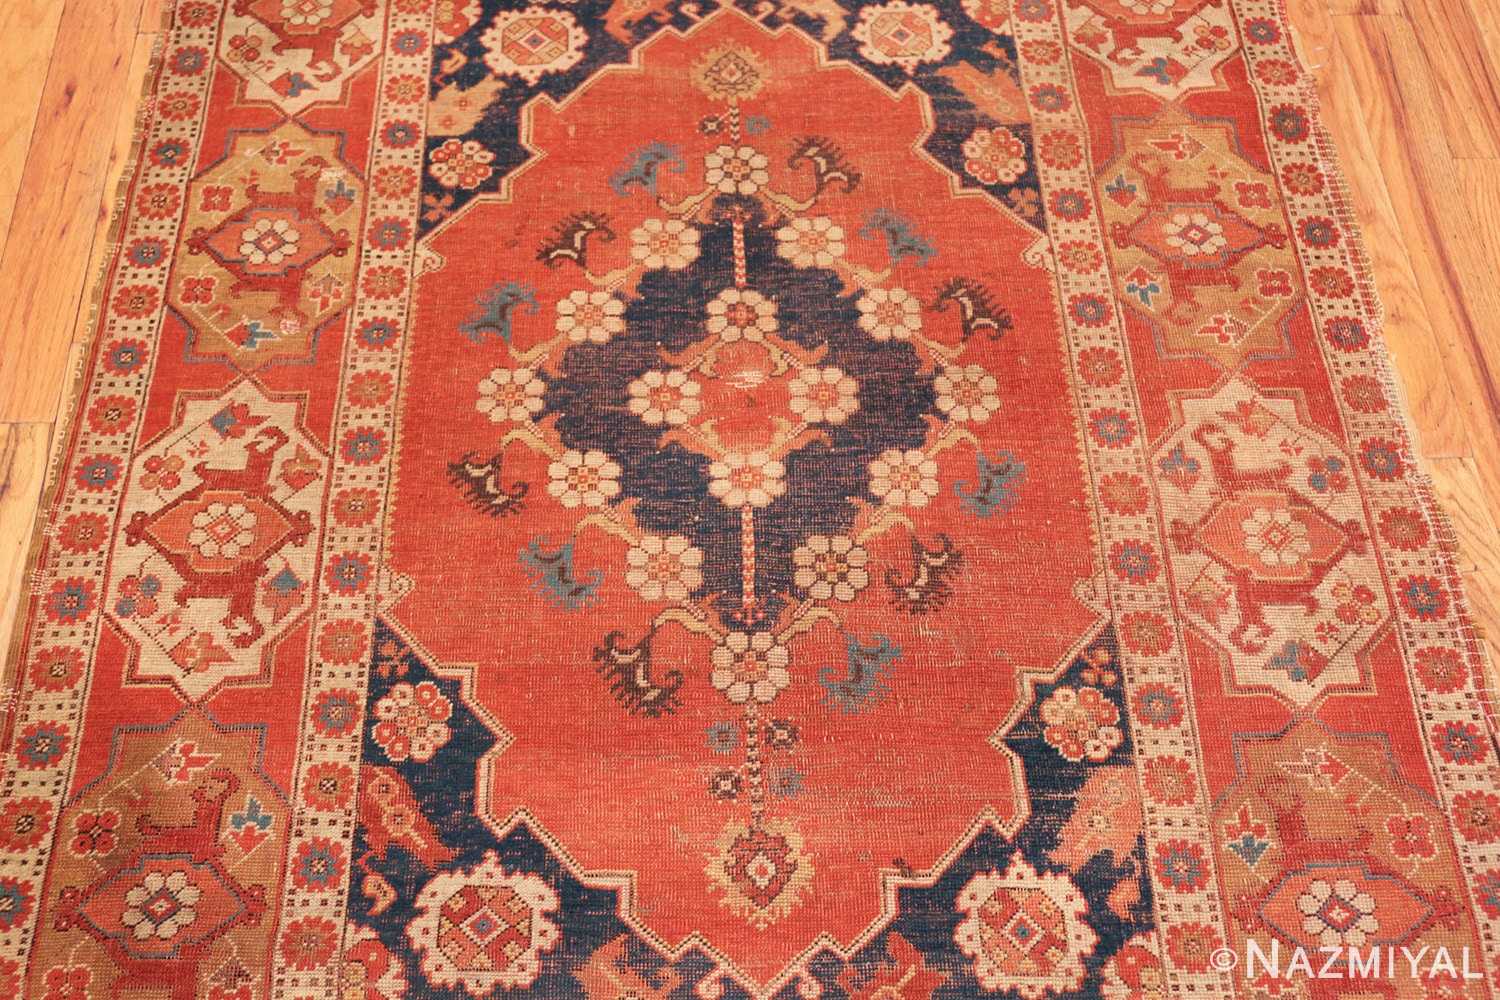 Field 17th century antique Transylvanian rug 70169 by Nazmiyal antique rugs collection